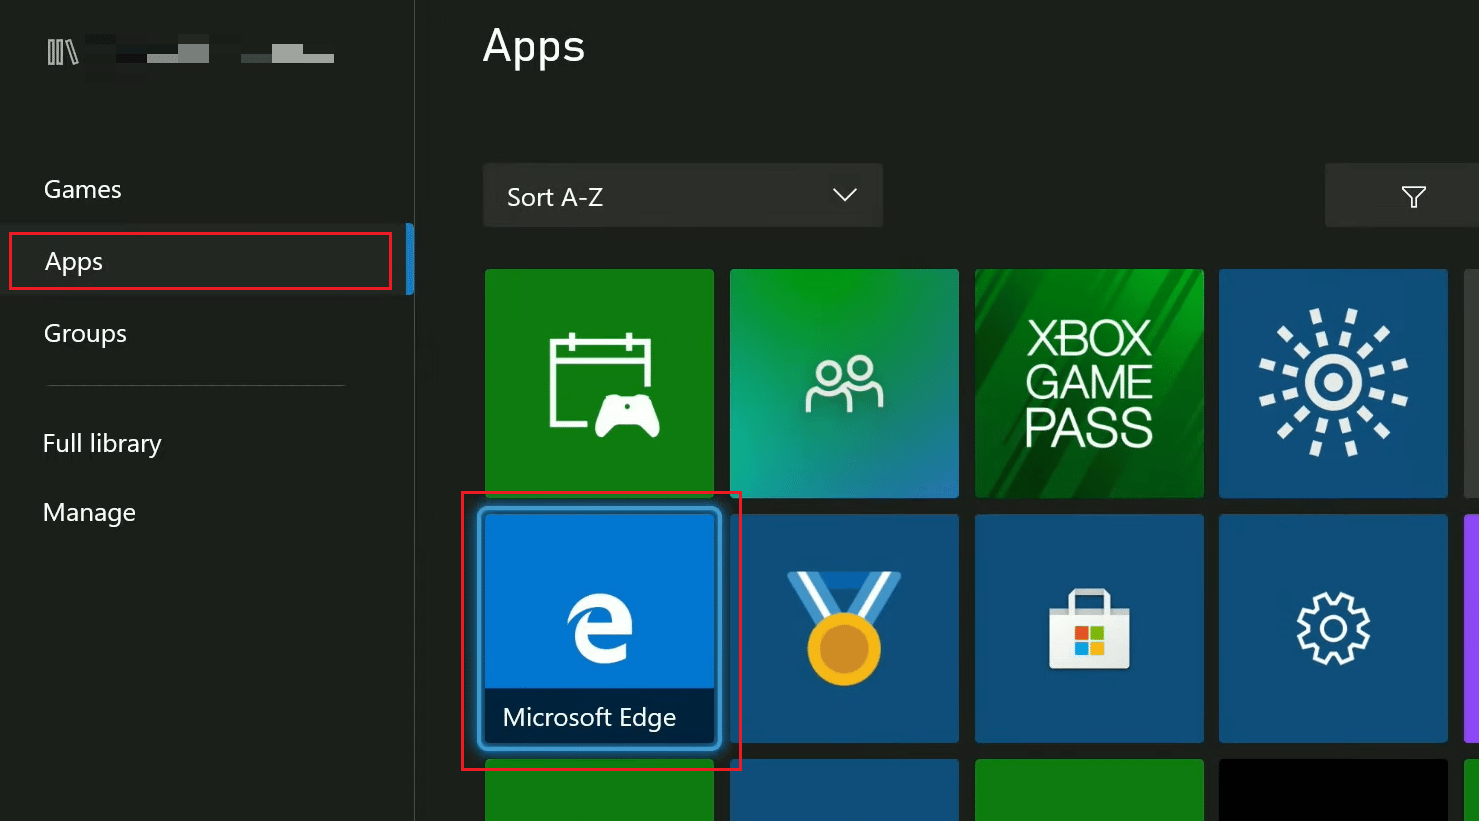 Select the Microsoft Edge browser from the Apps section